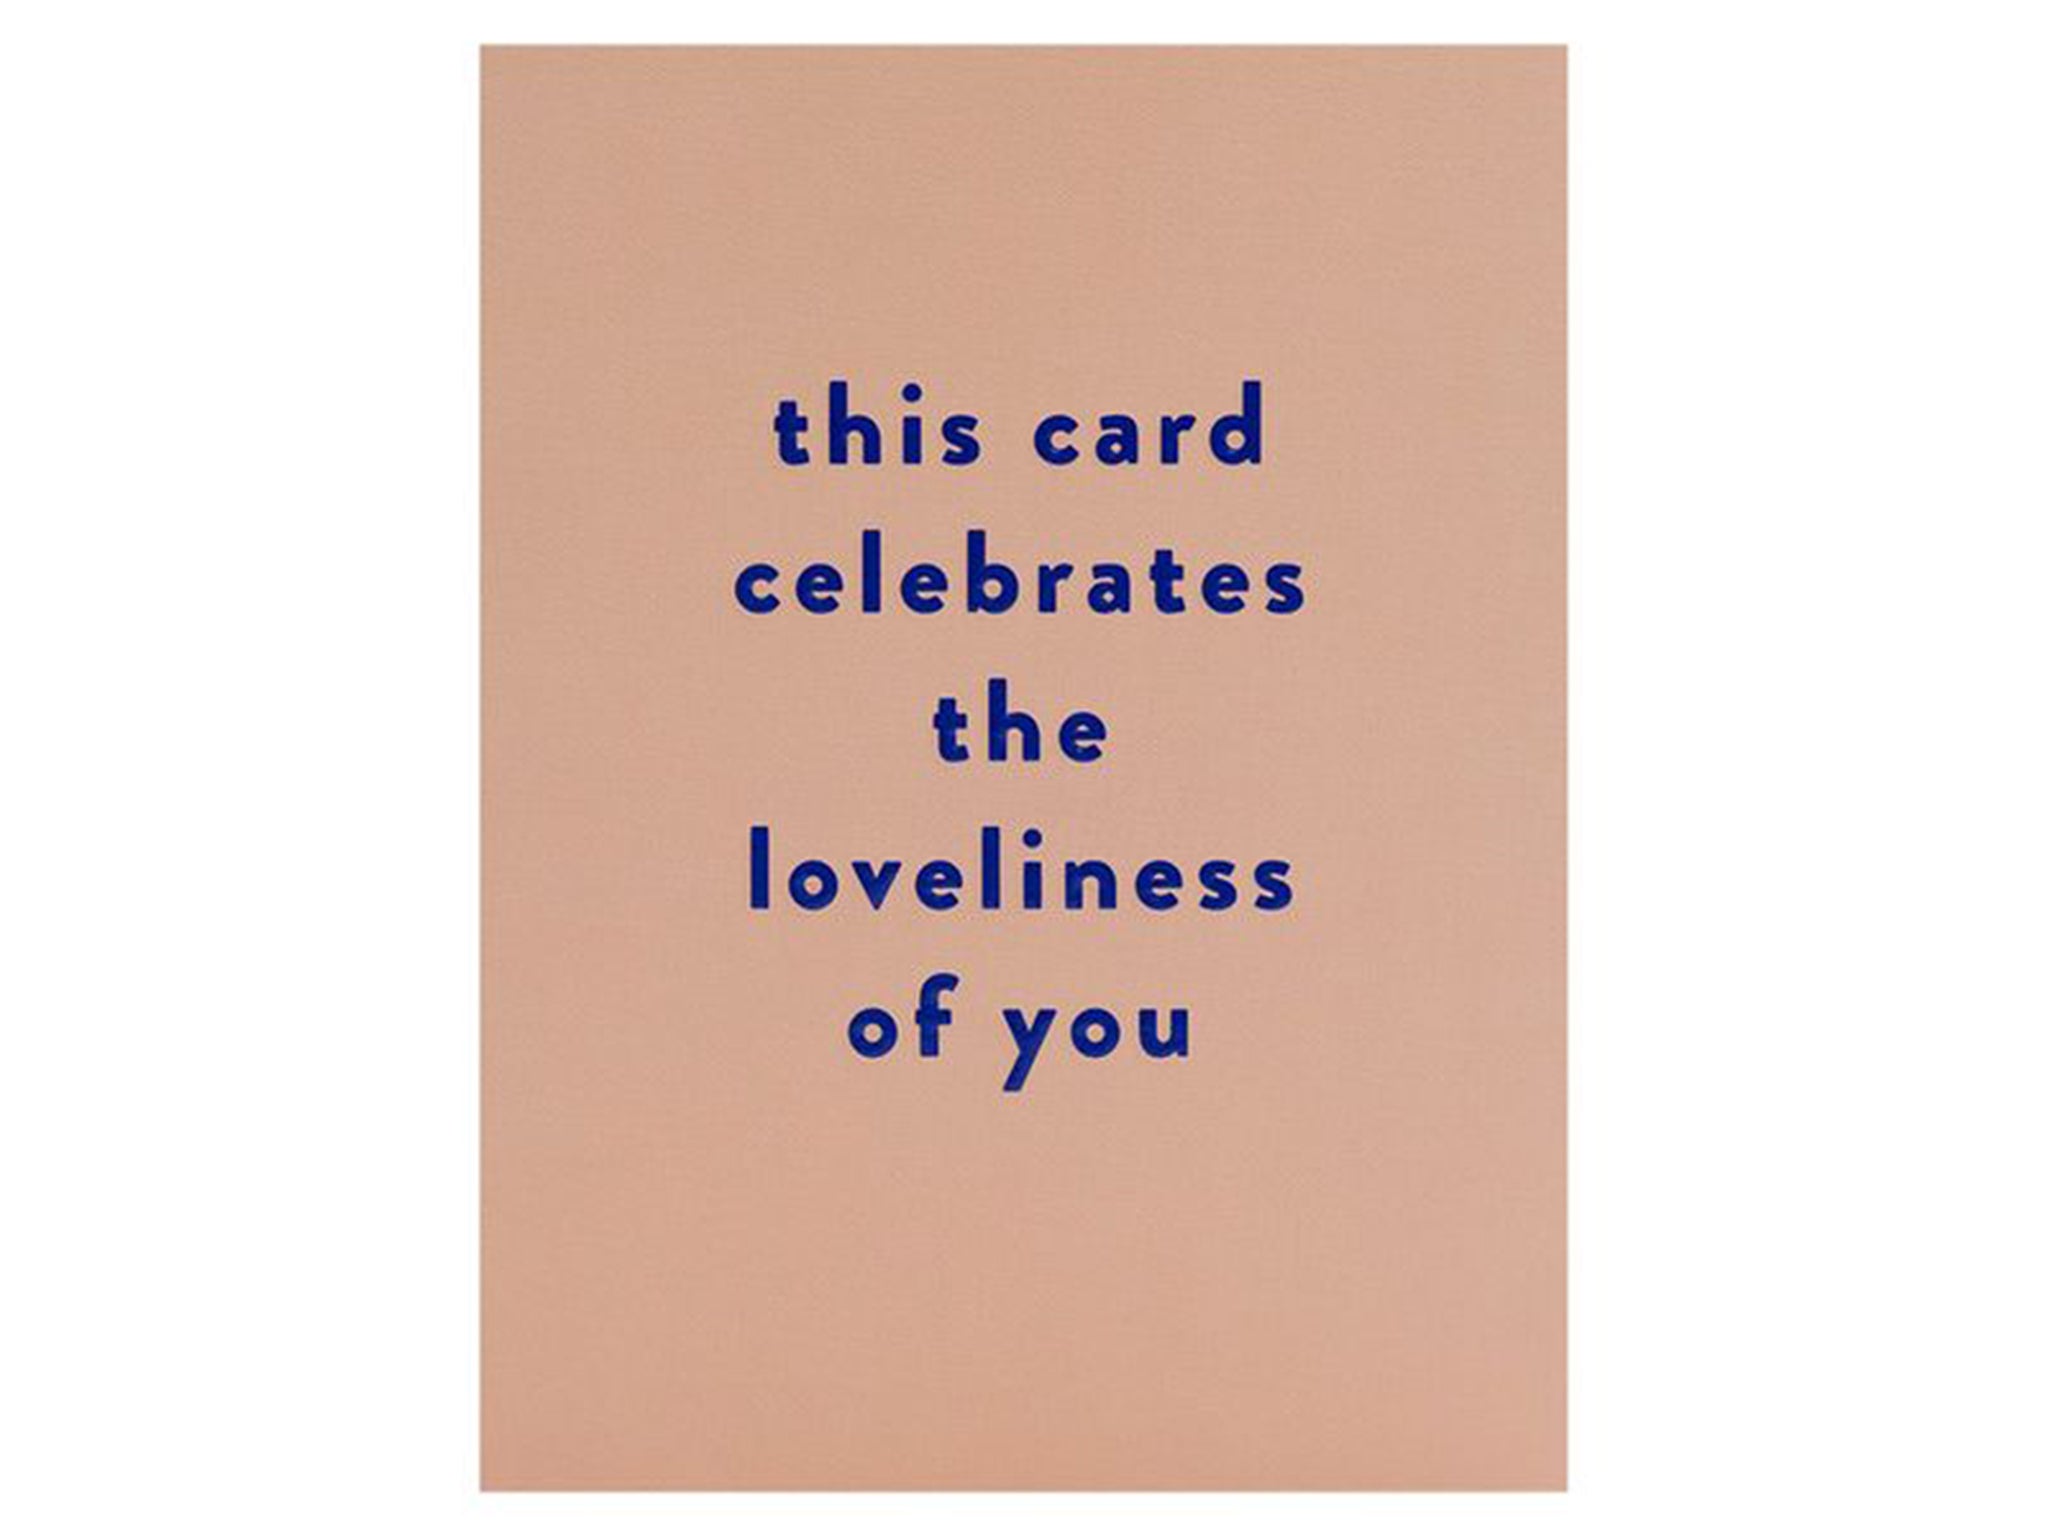 loveliness-of-you-card-indybest-galentines-day.jpg